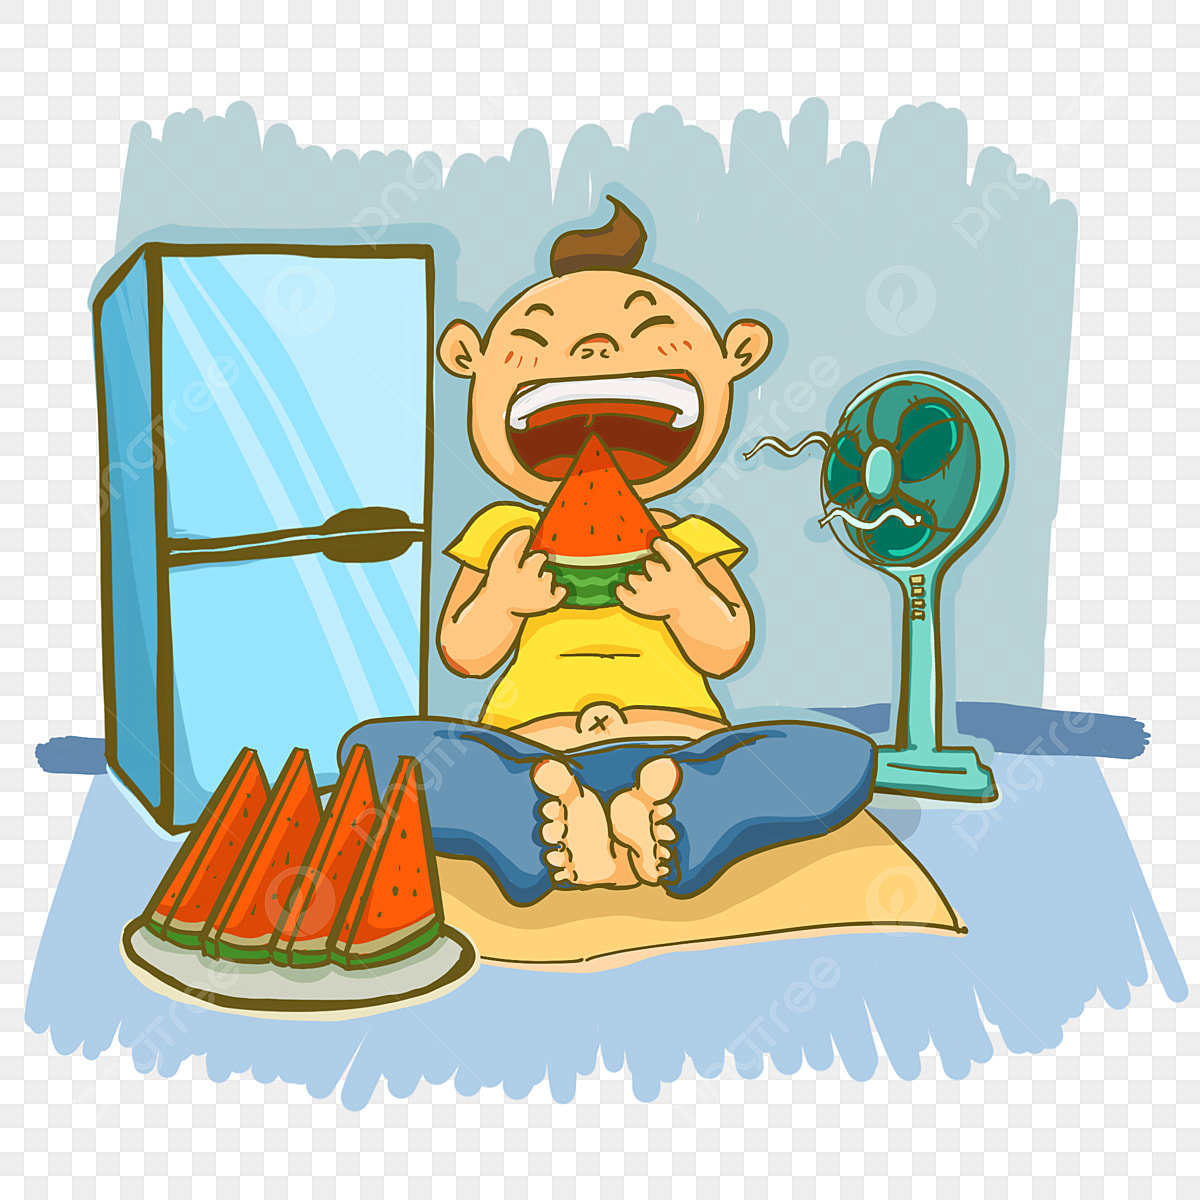 Summer watermelon hd transparent eating watermelon at home in the summer for a cool summer hand drawn cartoon greedy little boy summer at home watermelon png image for free download